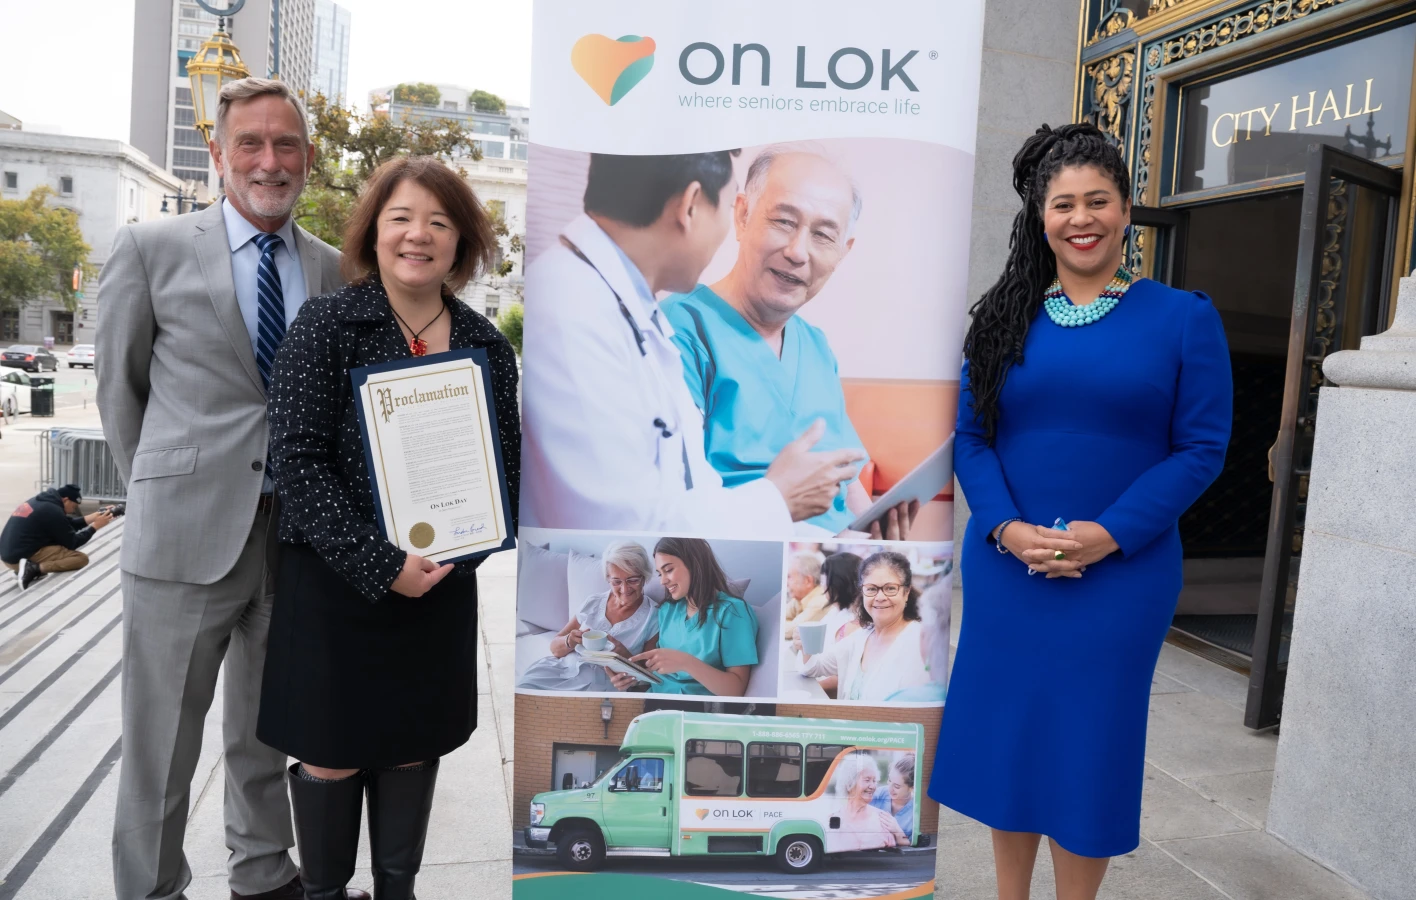 Mayor Breed Issues Proclamation for On Lok Day